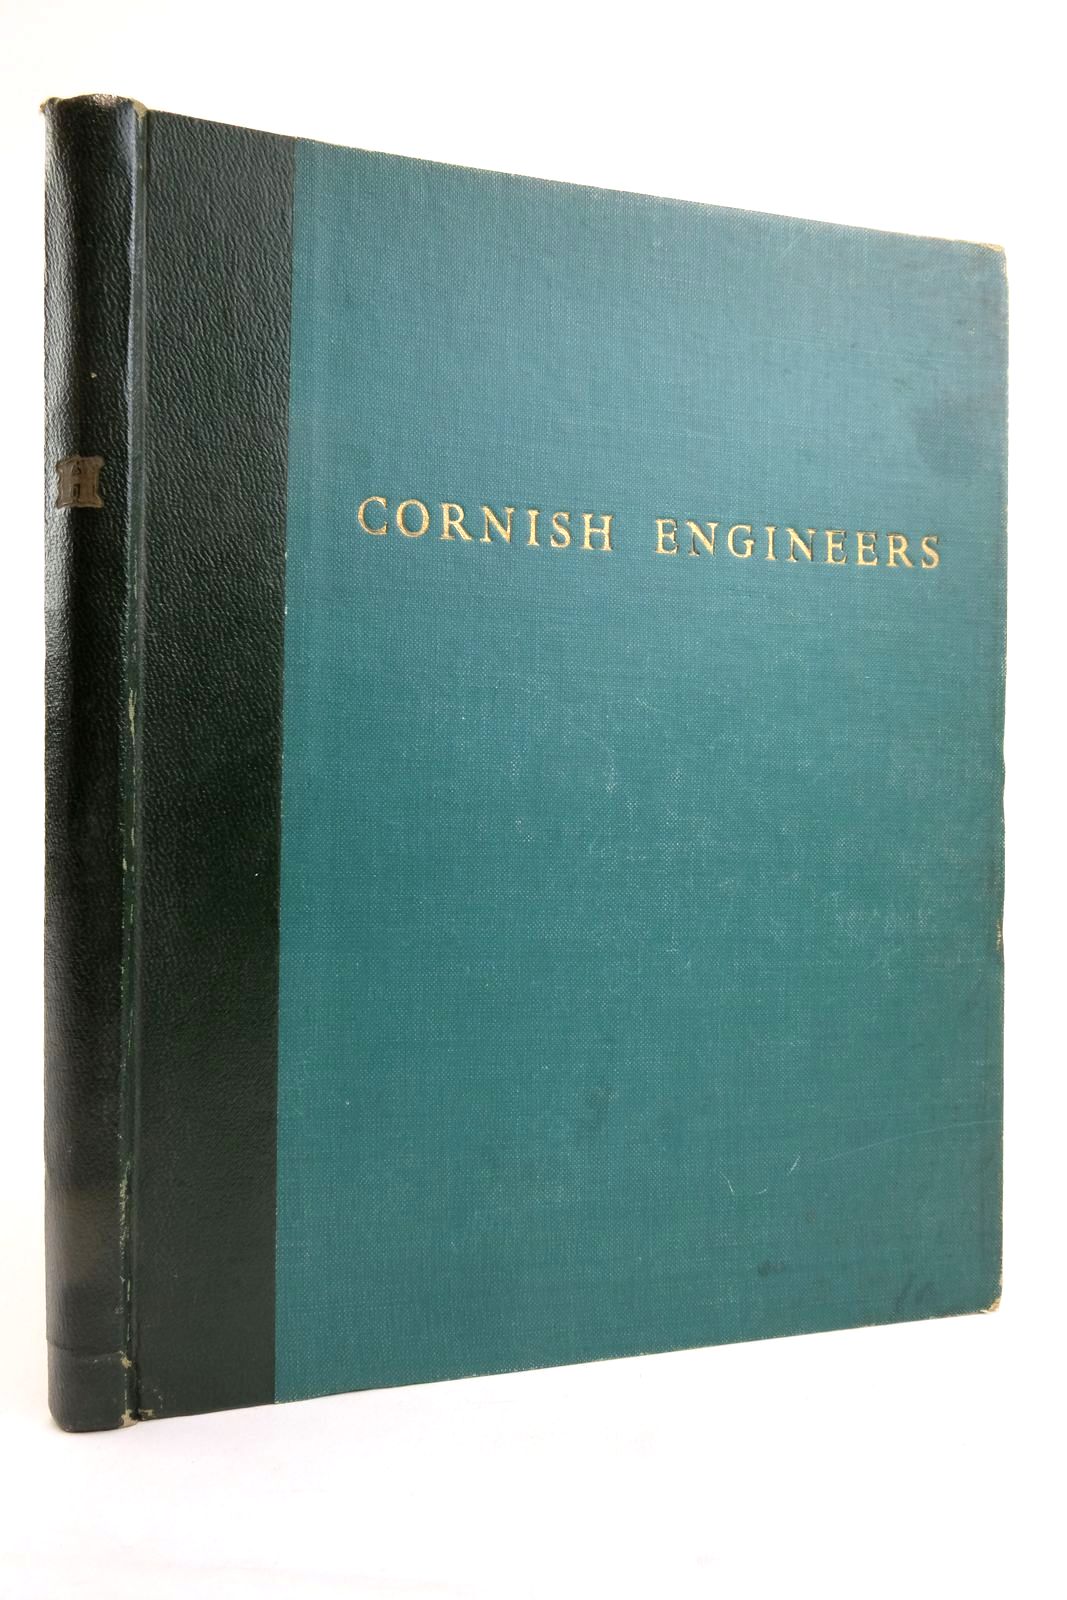 Photo of CORNISH ENGINEERS written by Hollowood, Bernard illustrated by Cuneo, Terence published by Holman Bros Ltd. (STOCK CODE: 2136377)  for sale by Stella & Rose's Books